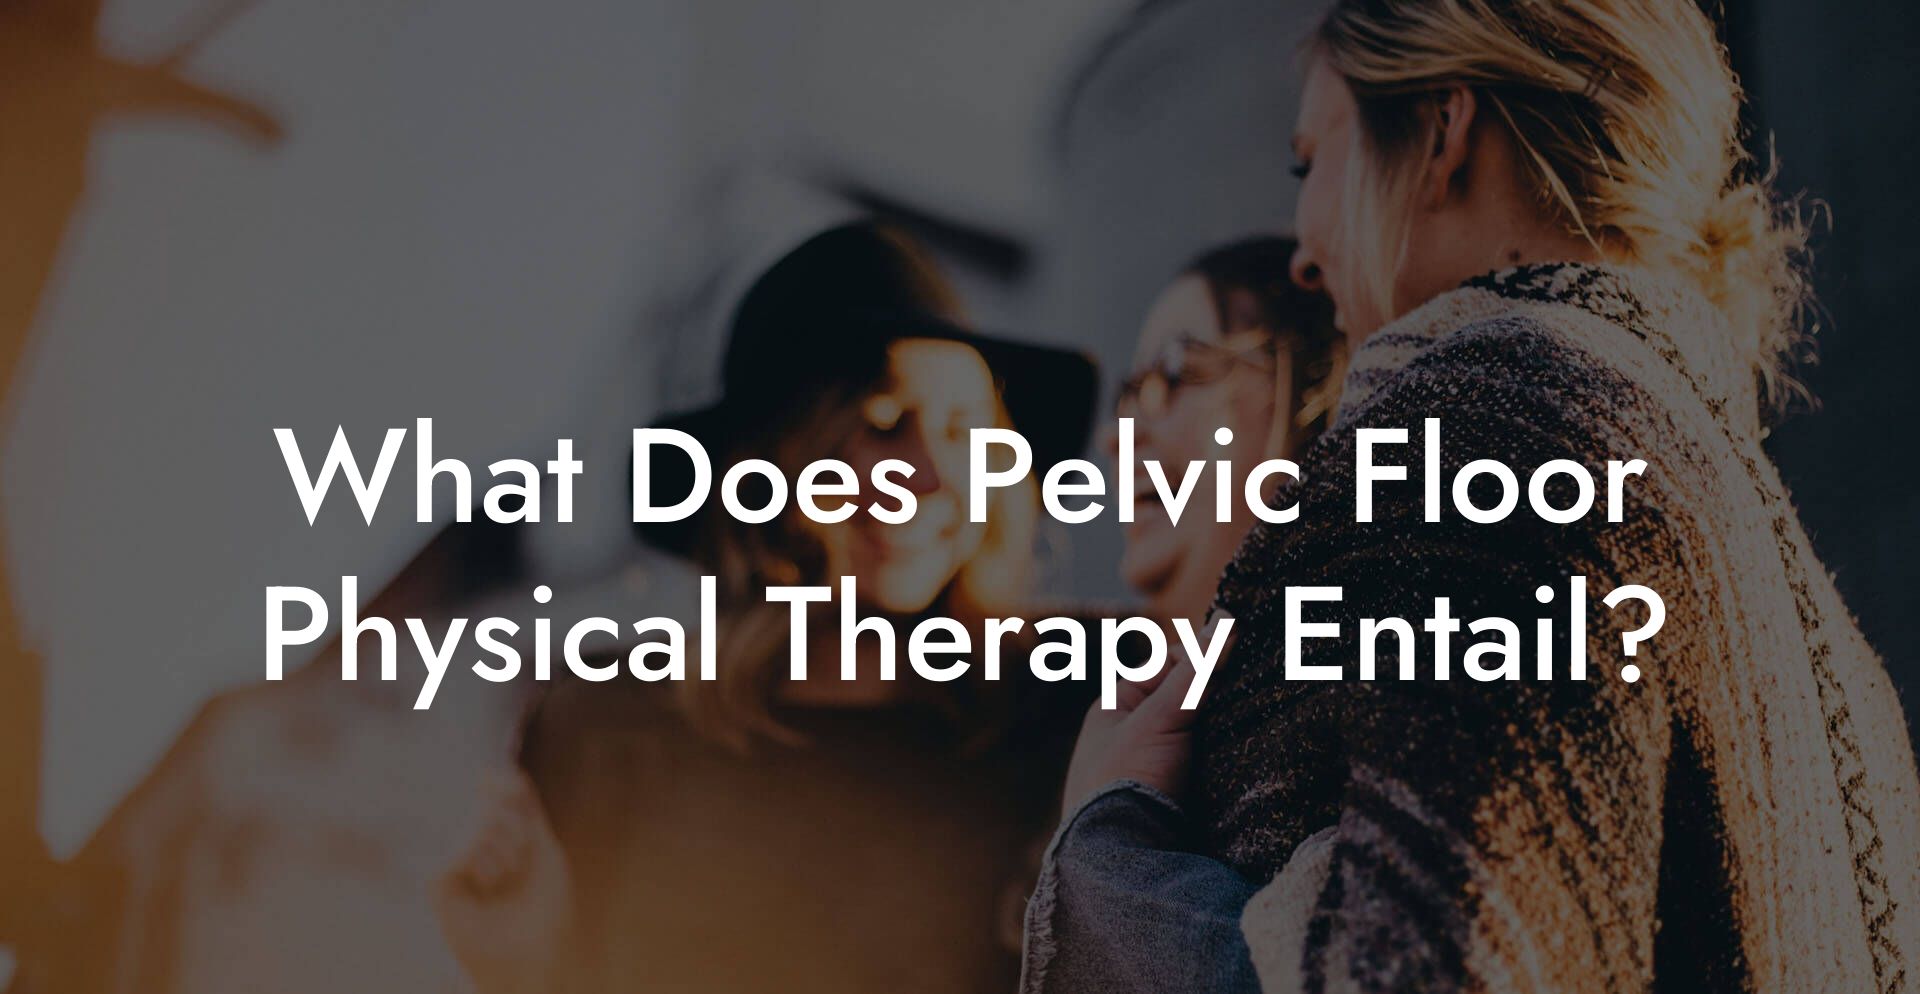 What Does Pelvic Floor Physical Therapy Entail